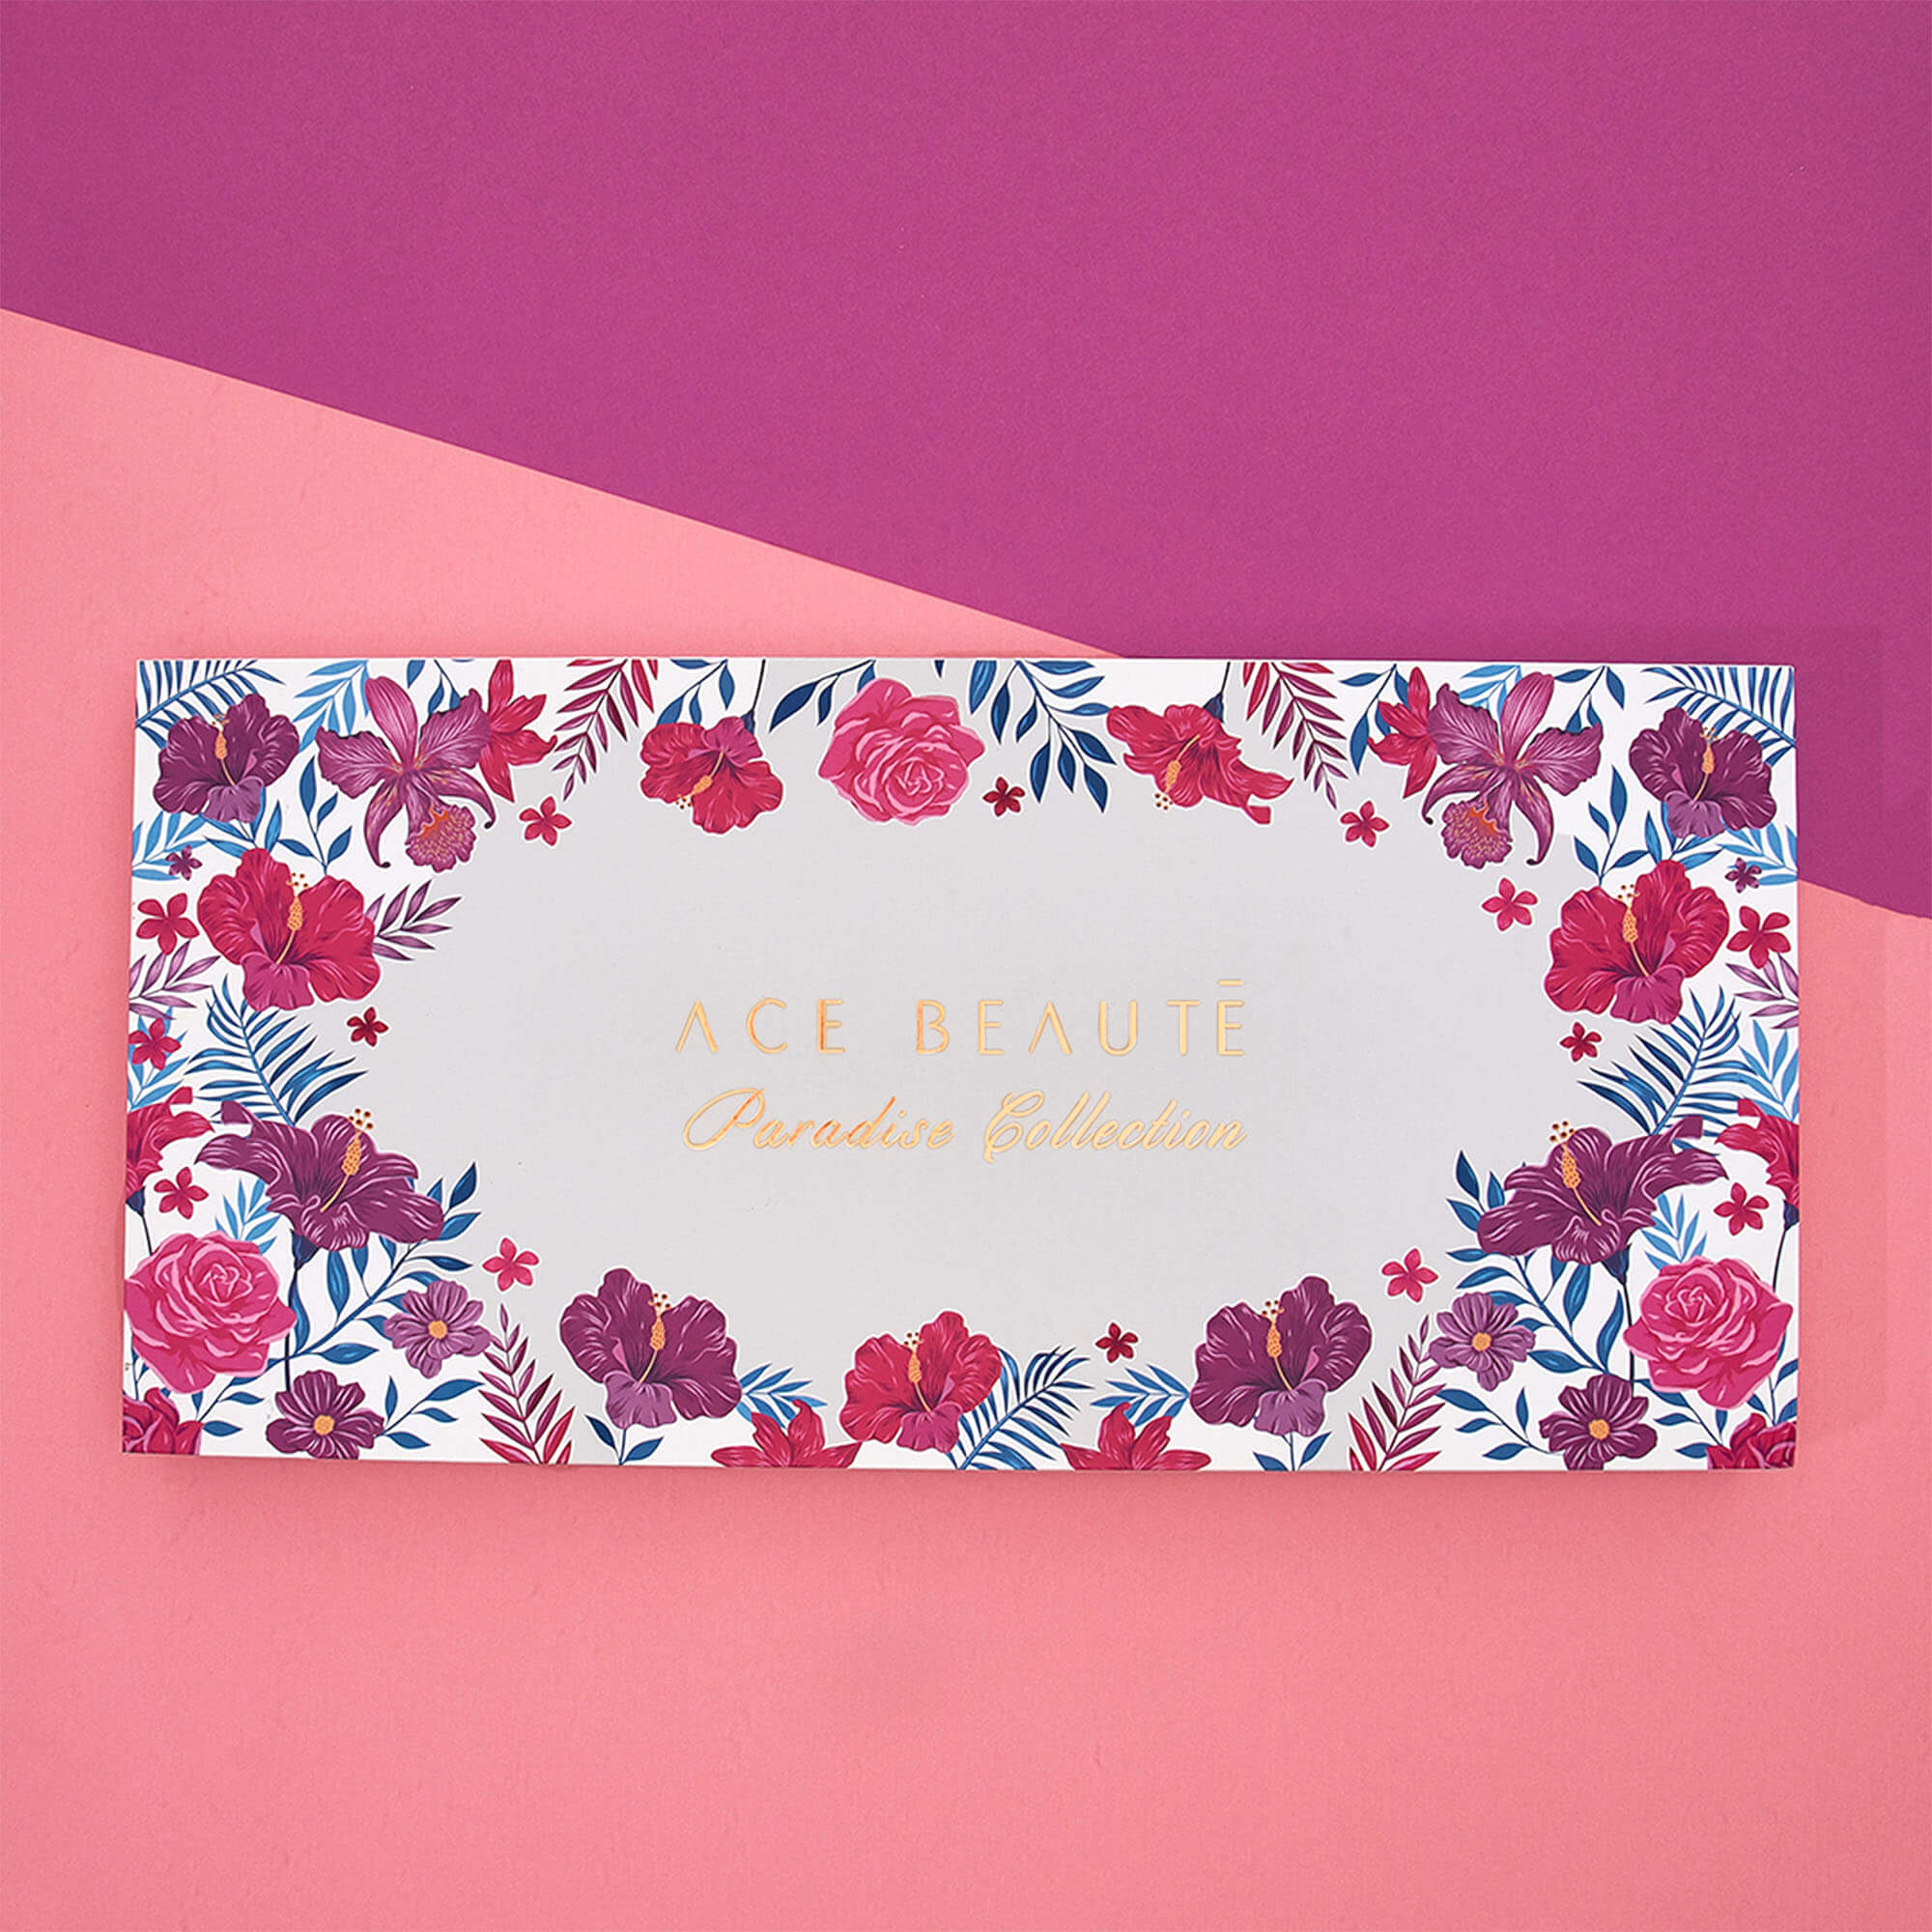 Ace Beauté Paradise Collection with Limited Edition PR Box (Blossom Passion, Paradise Fallen, Classical Paradise, & Slice of Paradise)